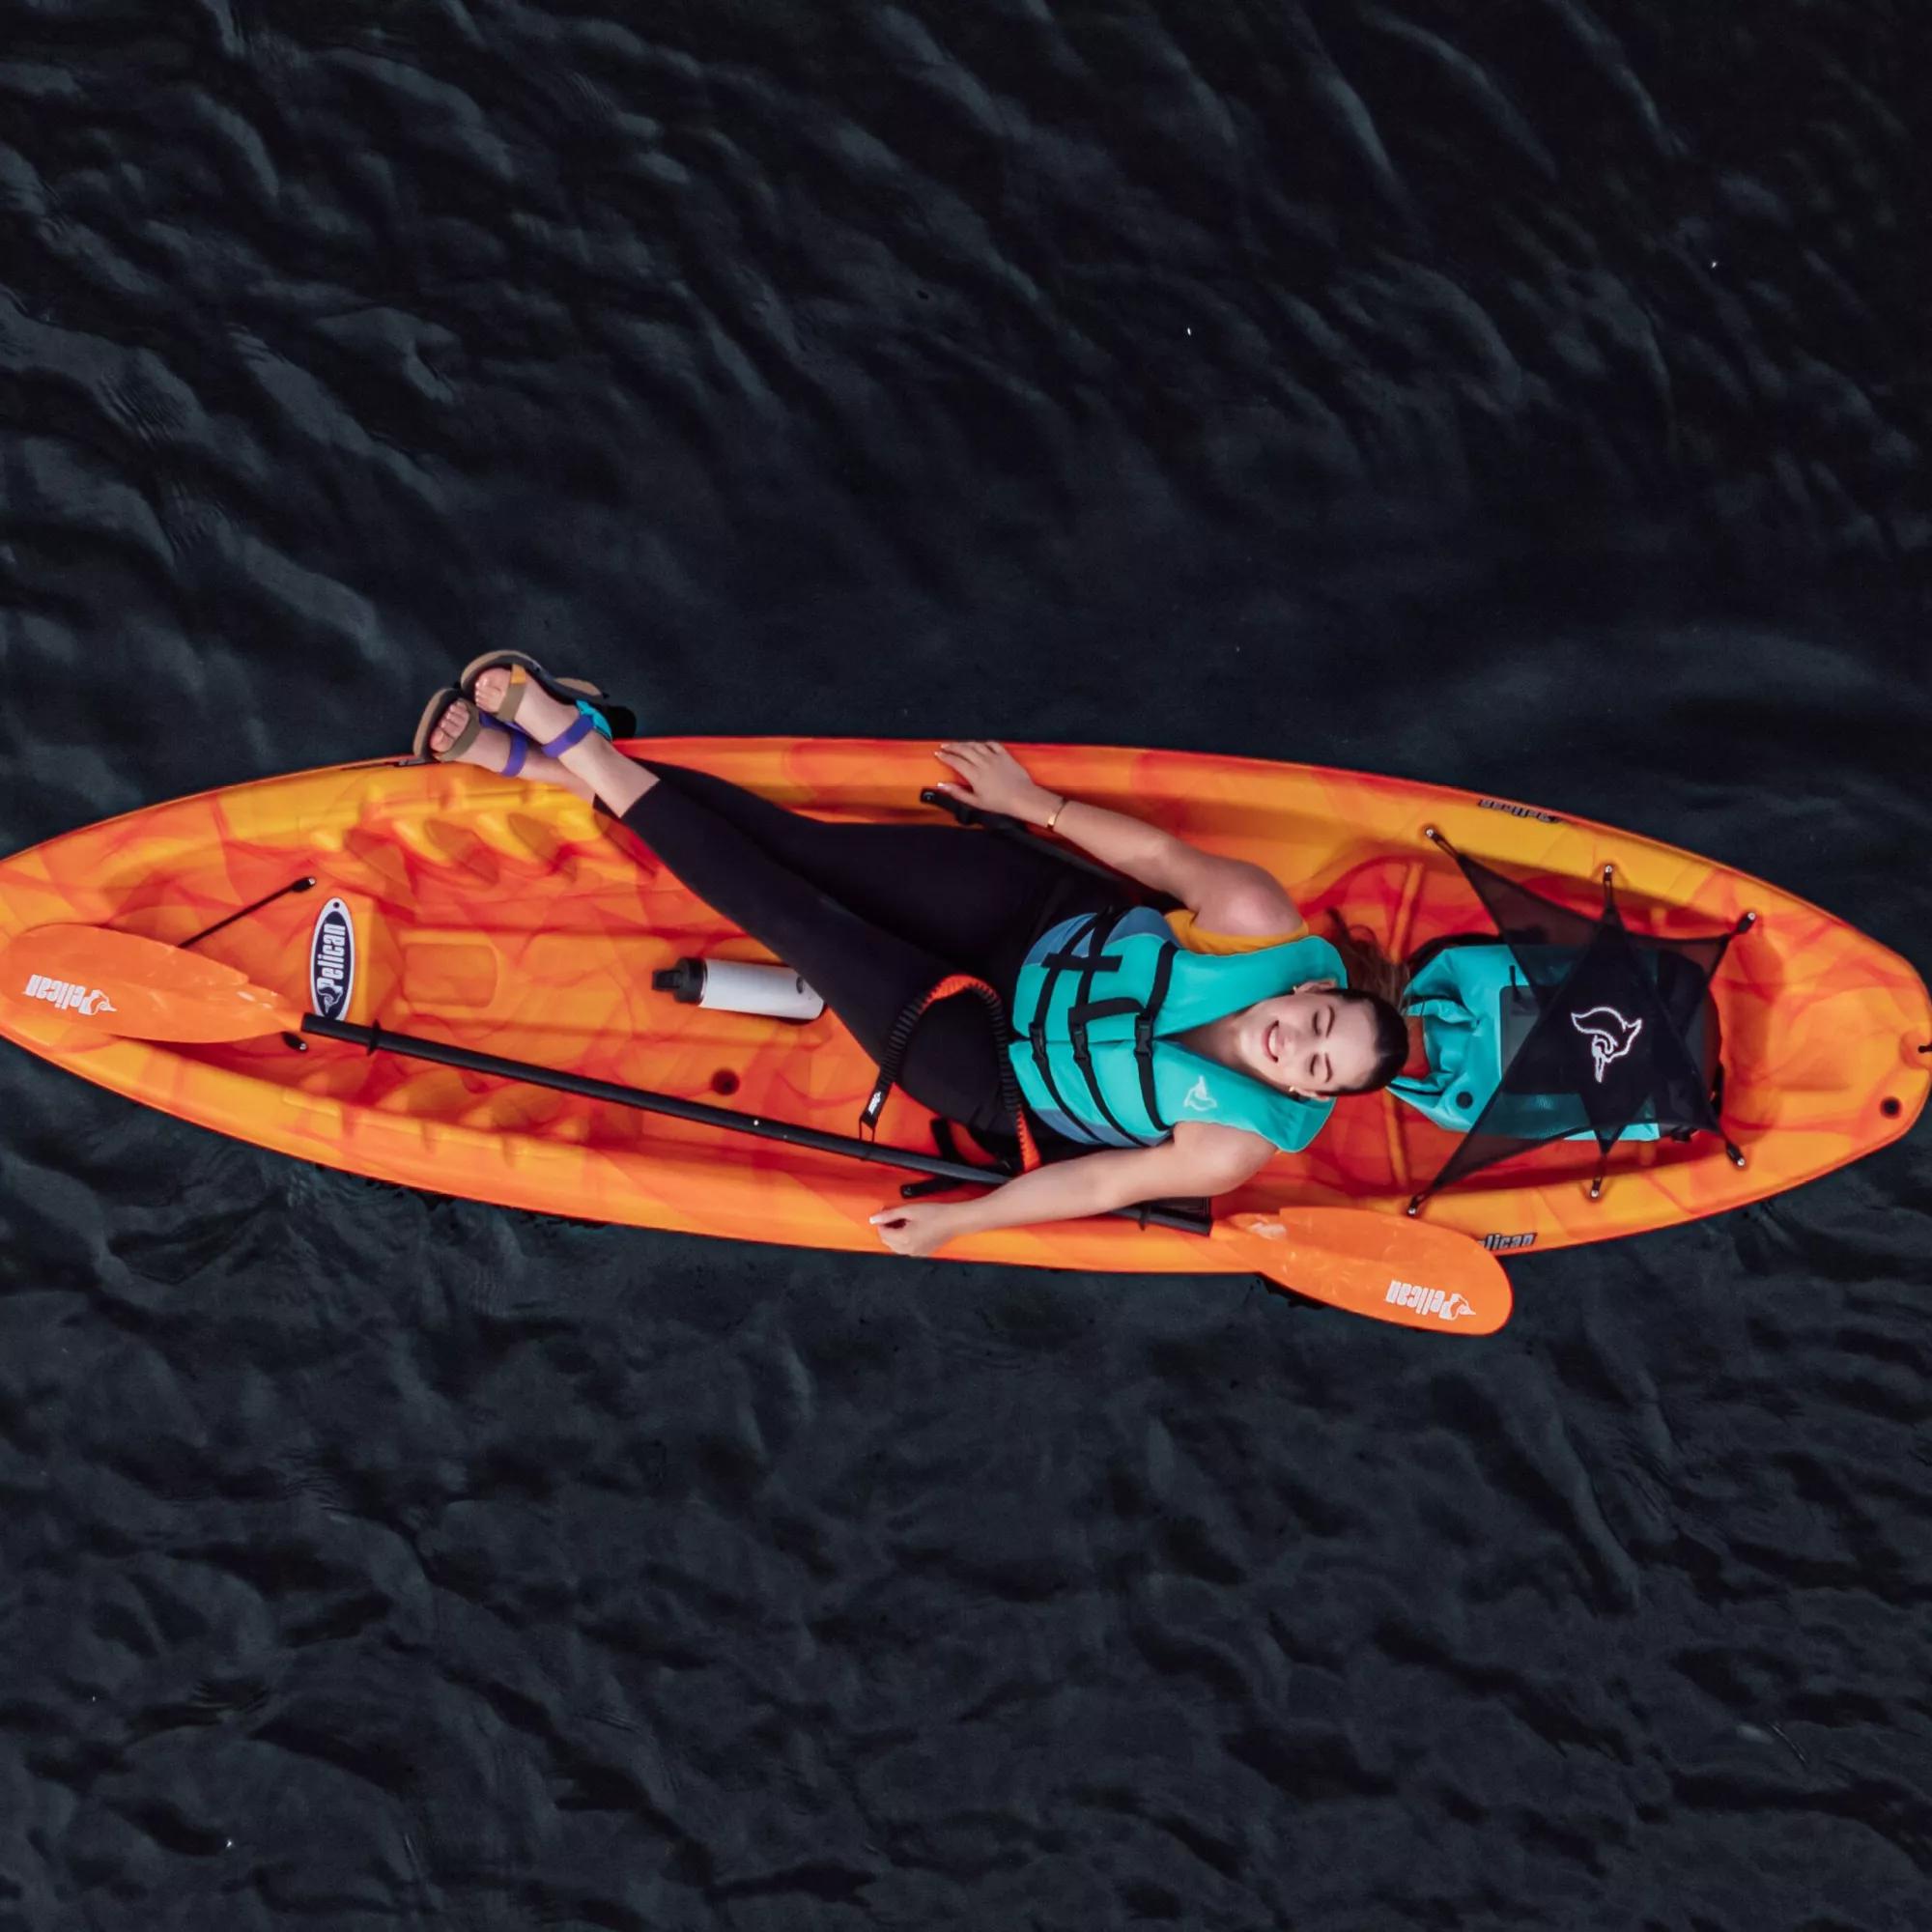 PELICAN - Sentinel 100X Recreational Kayak - Discontinued color/model - Yellow - KVF10P100-00 - LIFE STYLE 2